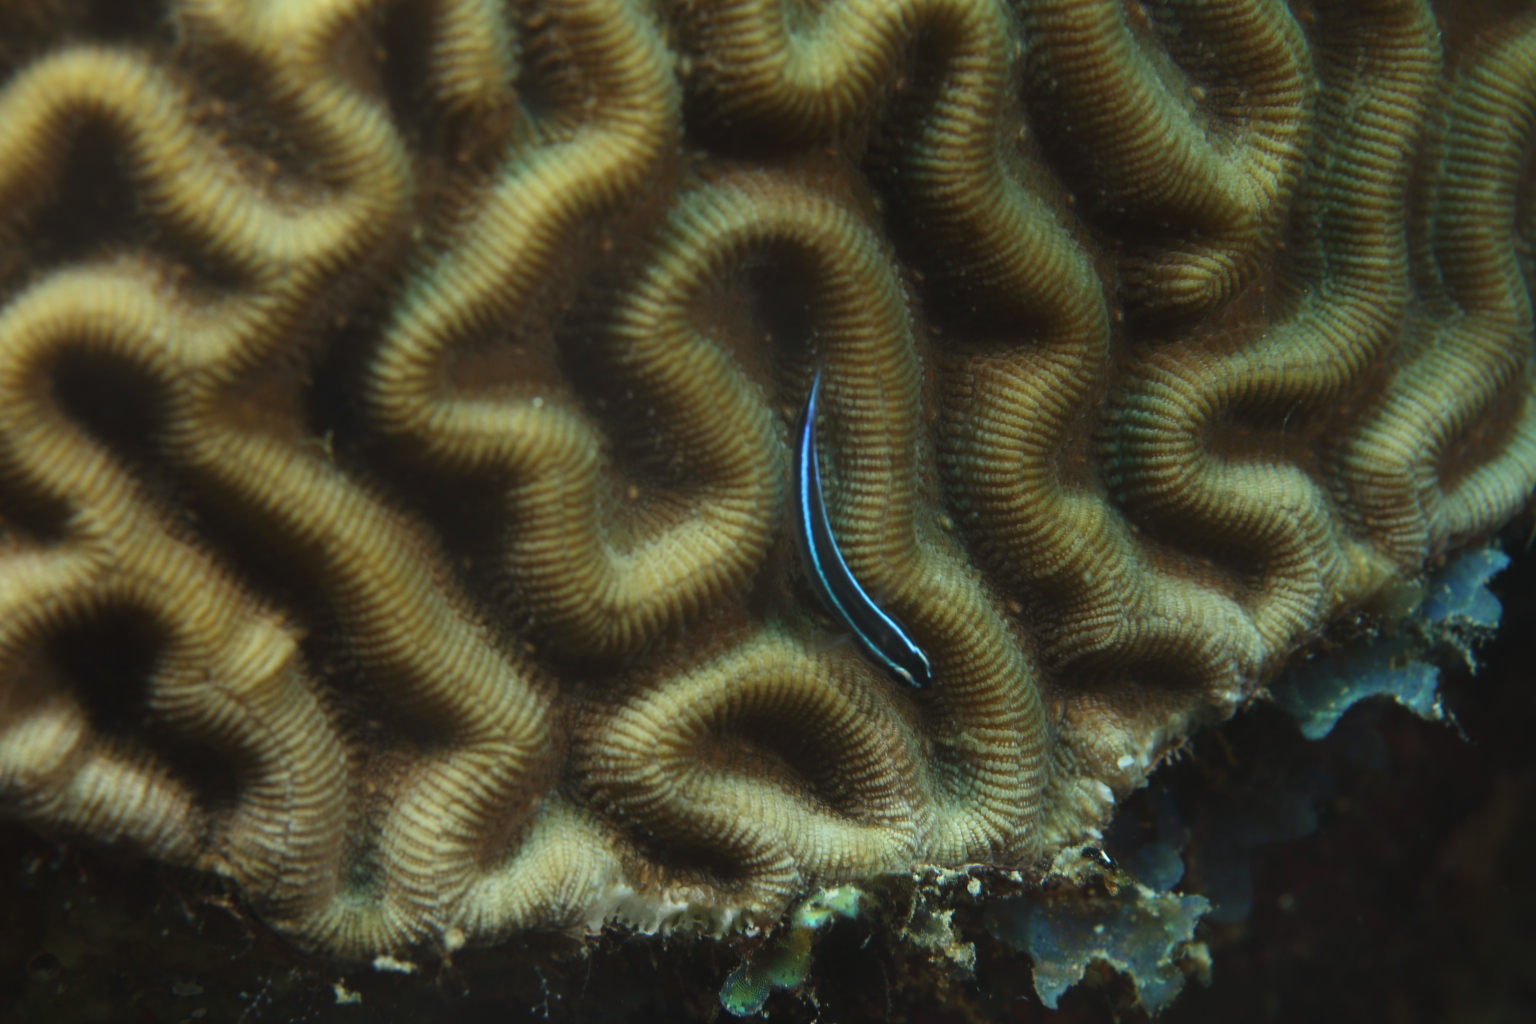 Caribbean Neon Goby on Brain Coral (Sep 13, 2018)